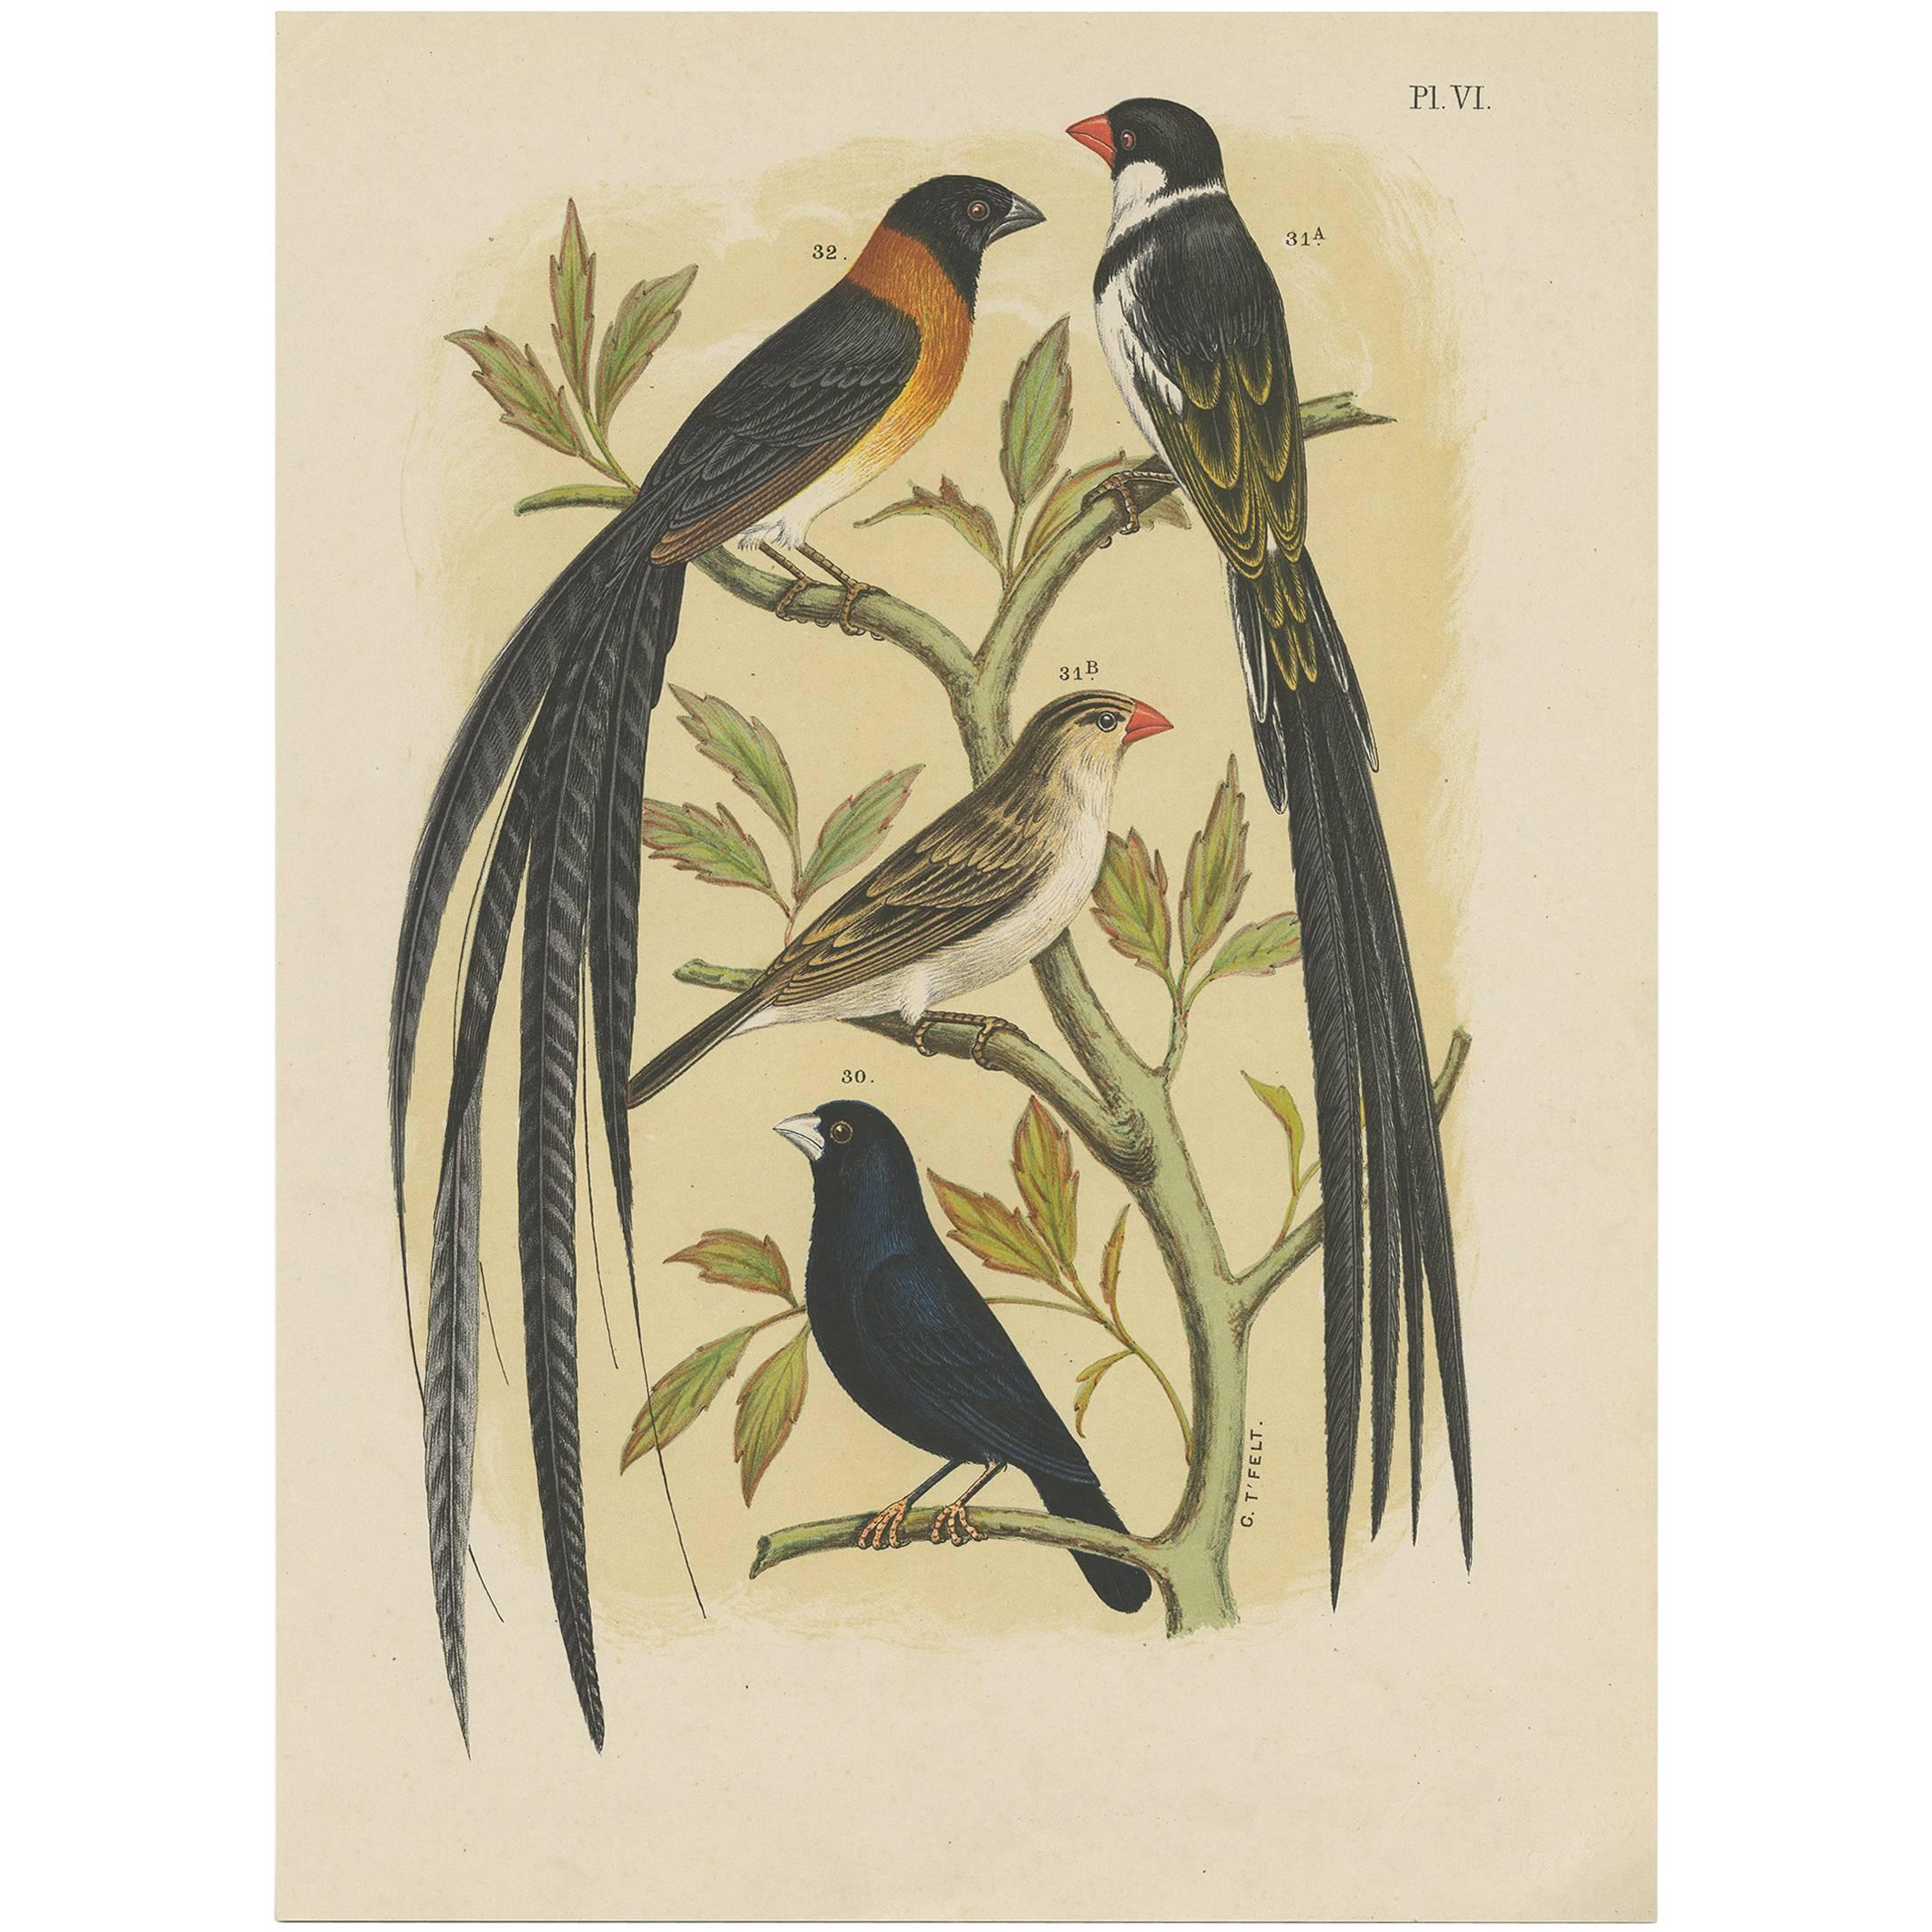 Antique Bird Print of the Whydahbird and Others by A. Nuyens, 1886